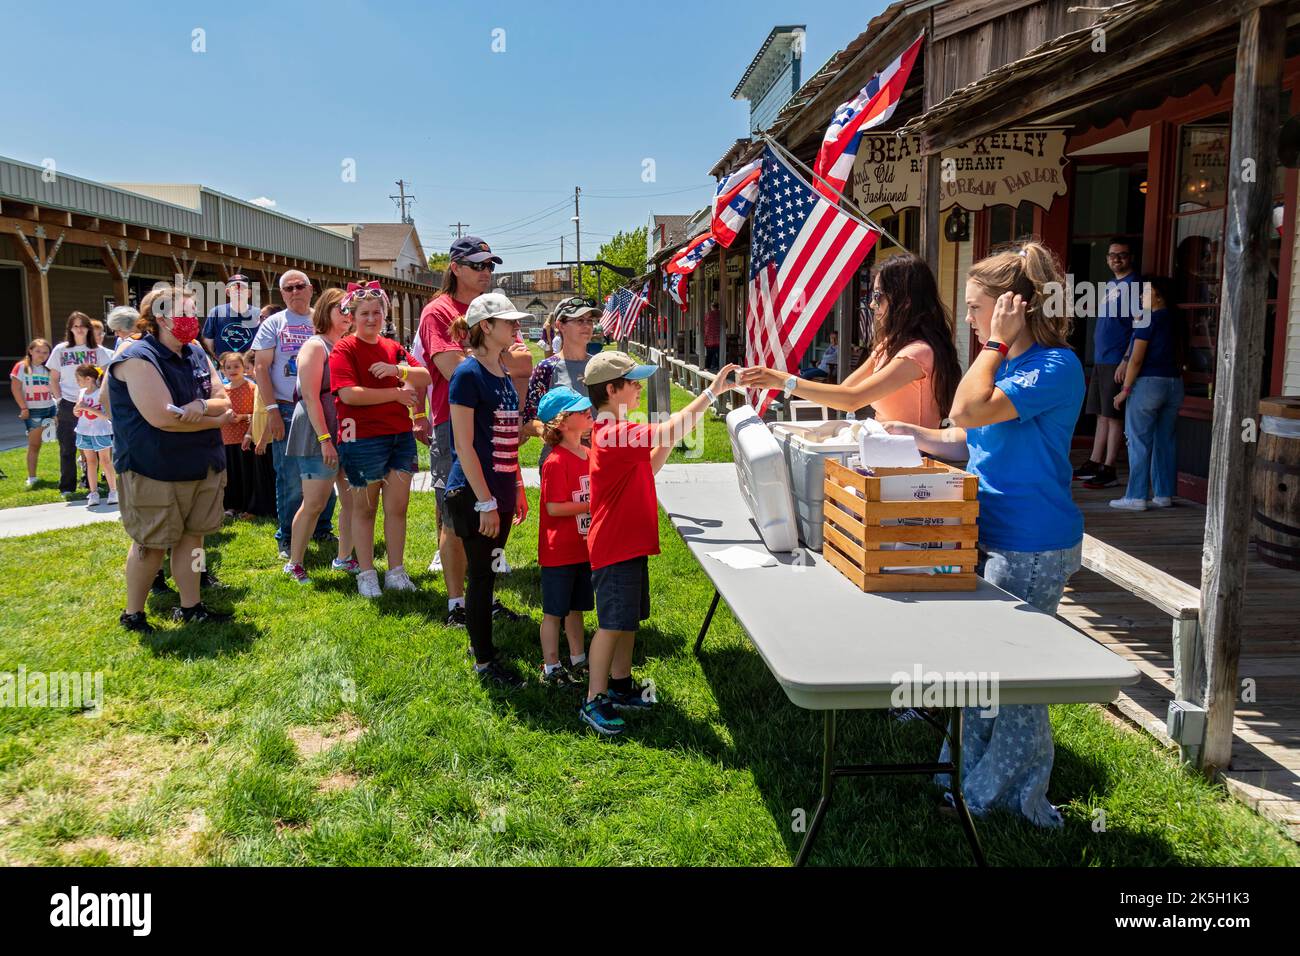 Dodge City, Kansas - People line up for a July 4th ice cream social at Boot Hill Museum. The museum preserves the history and culture of the old west. Stock Photo